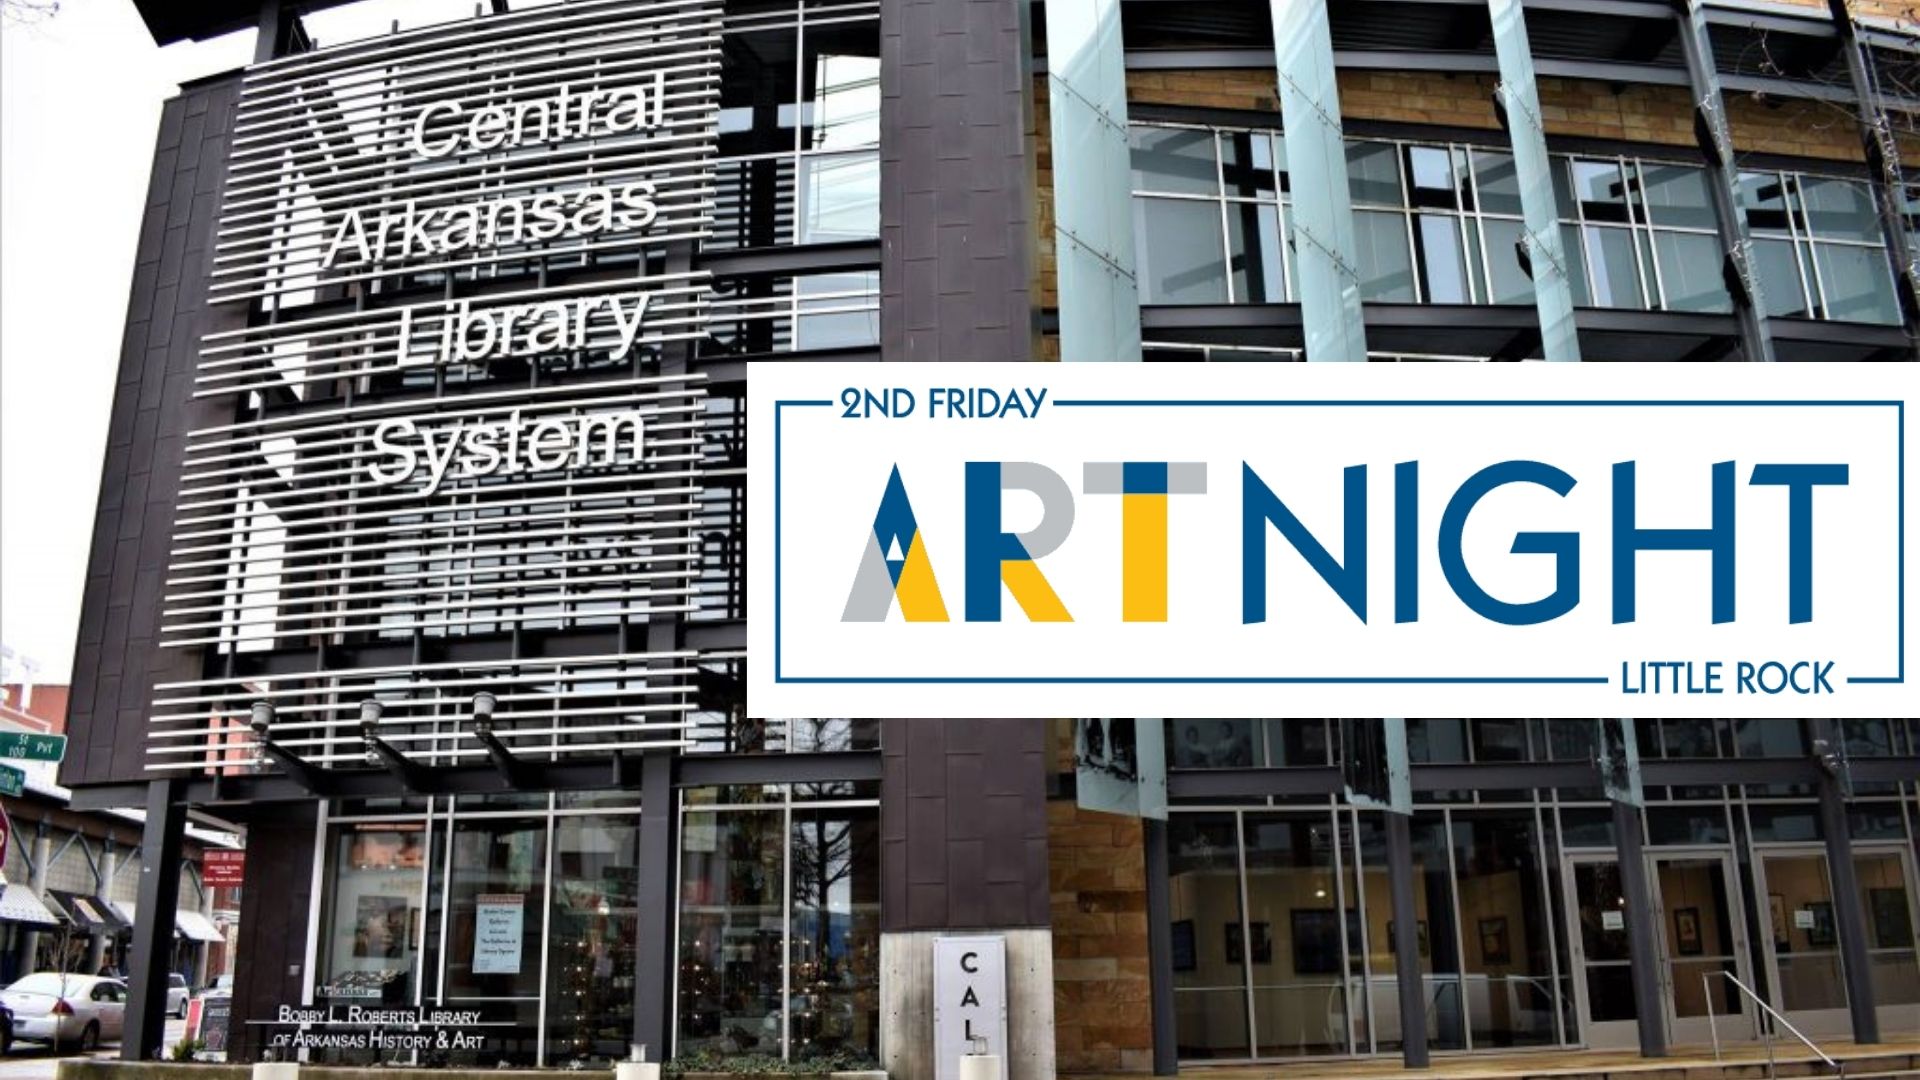 Steel and glass building with "2nd Friday Art Night" banner